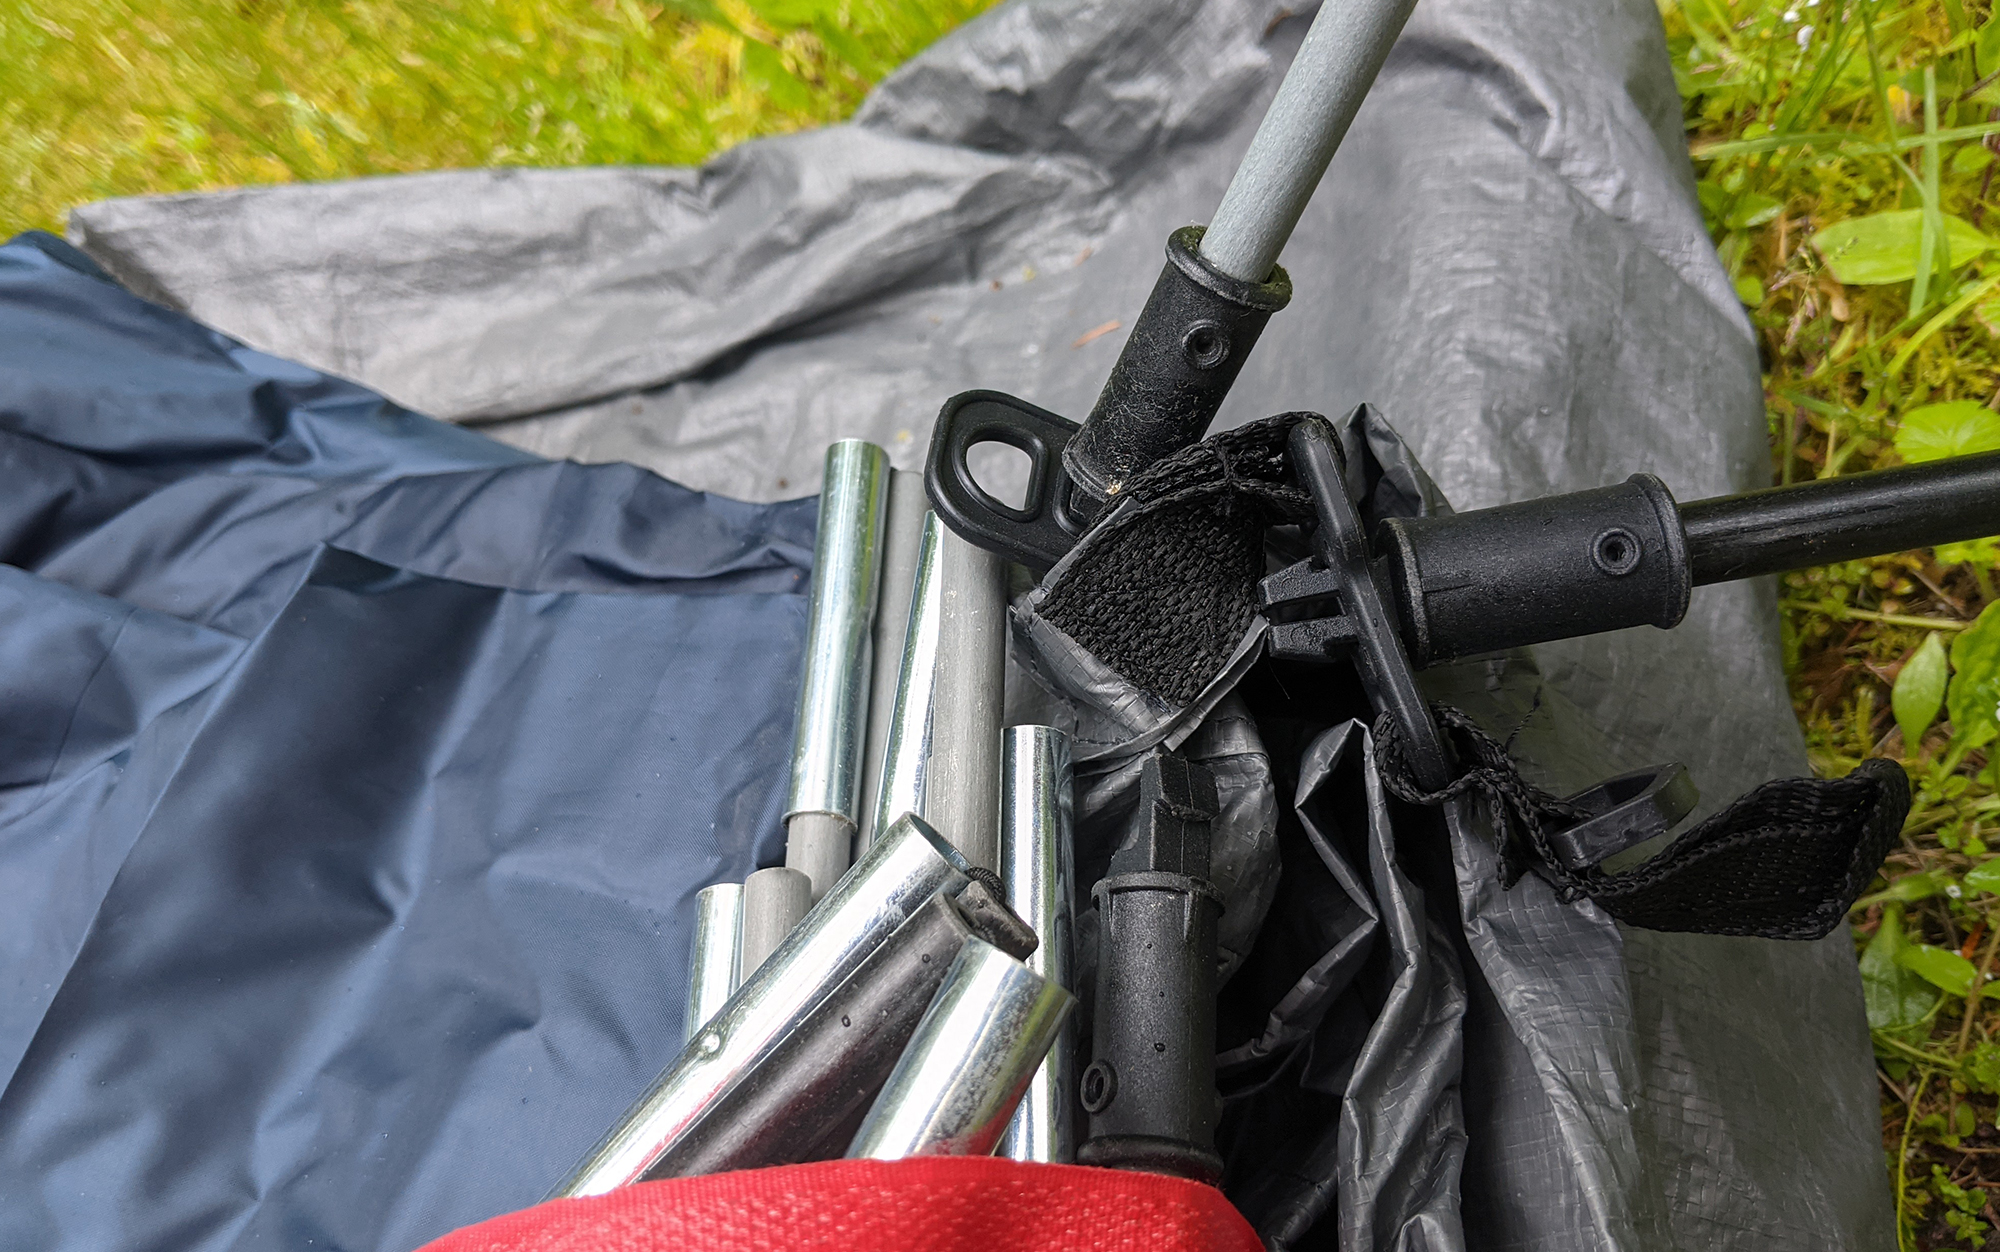 The Coleman tent poles are attached to the tent fabric.